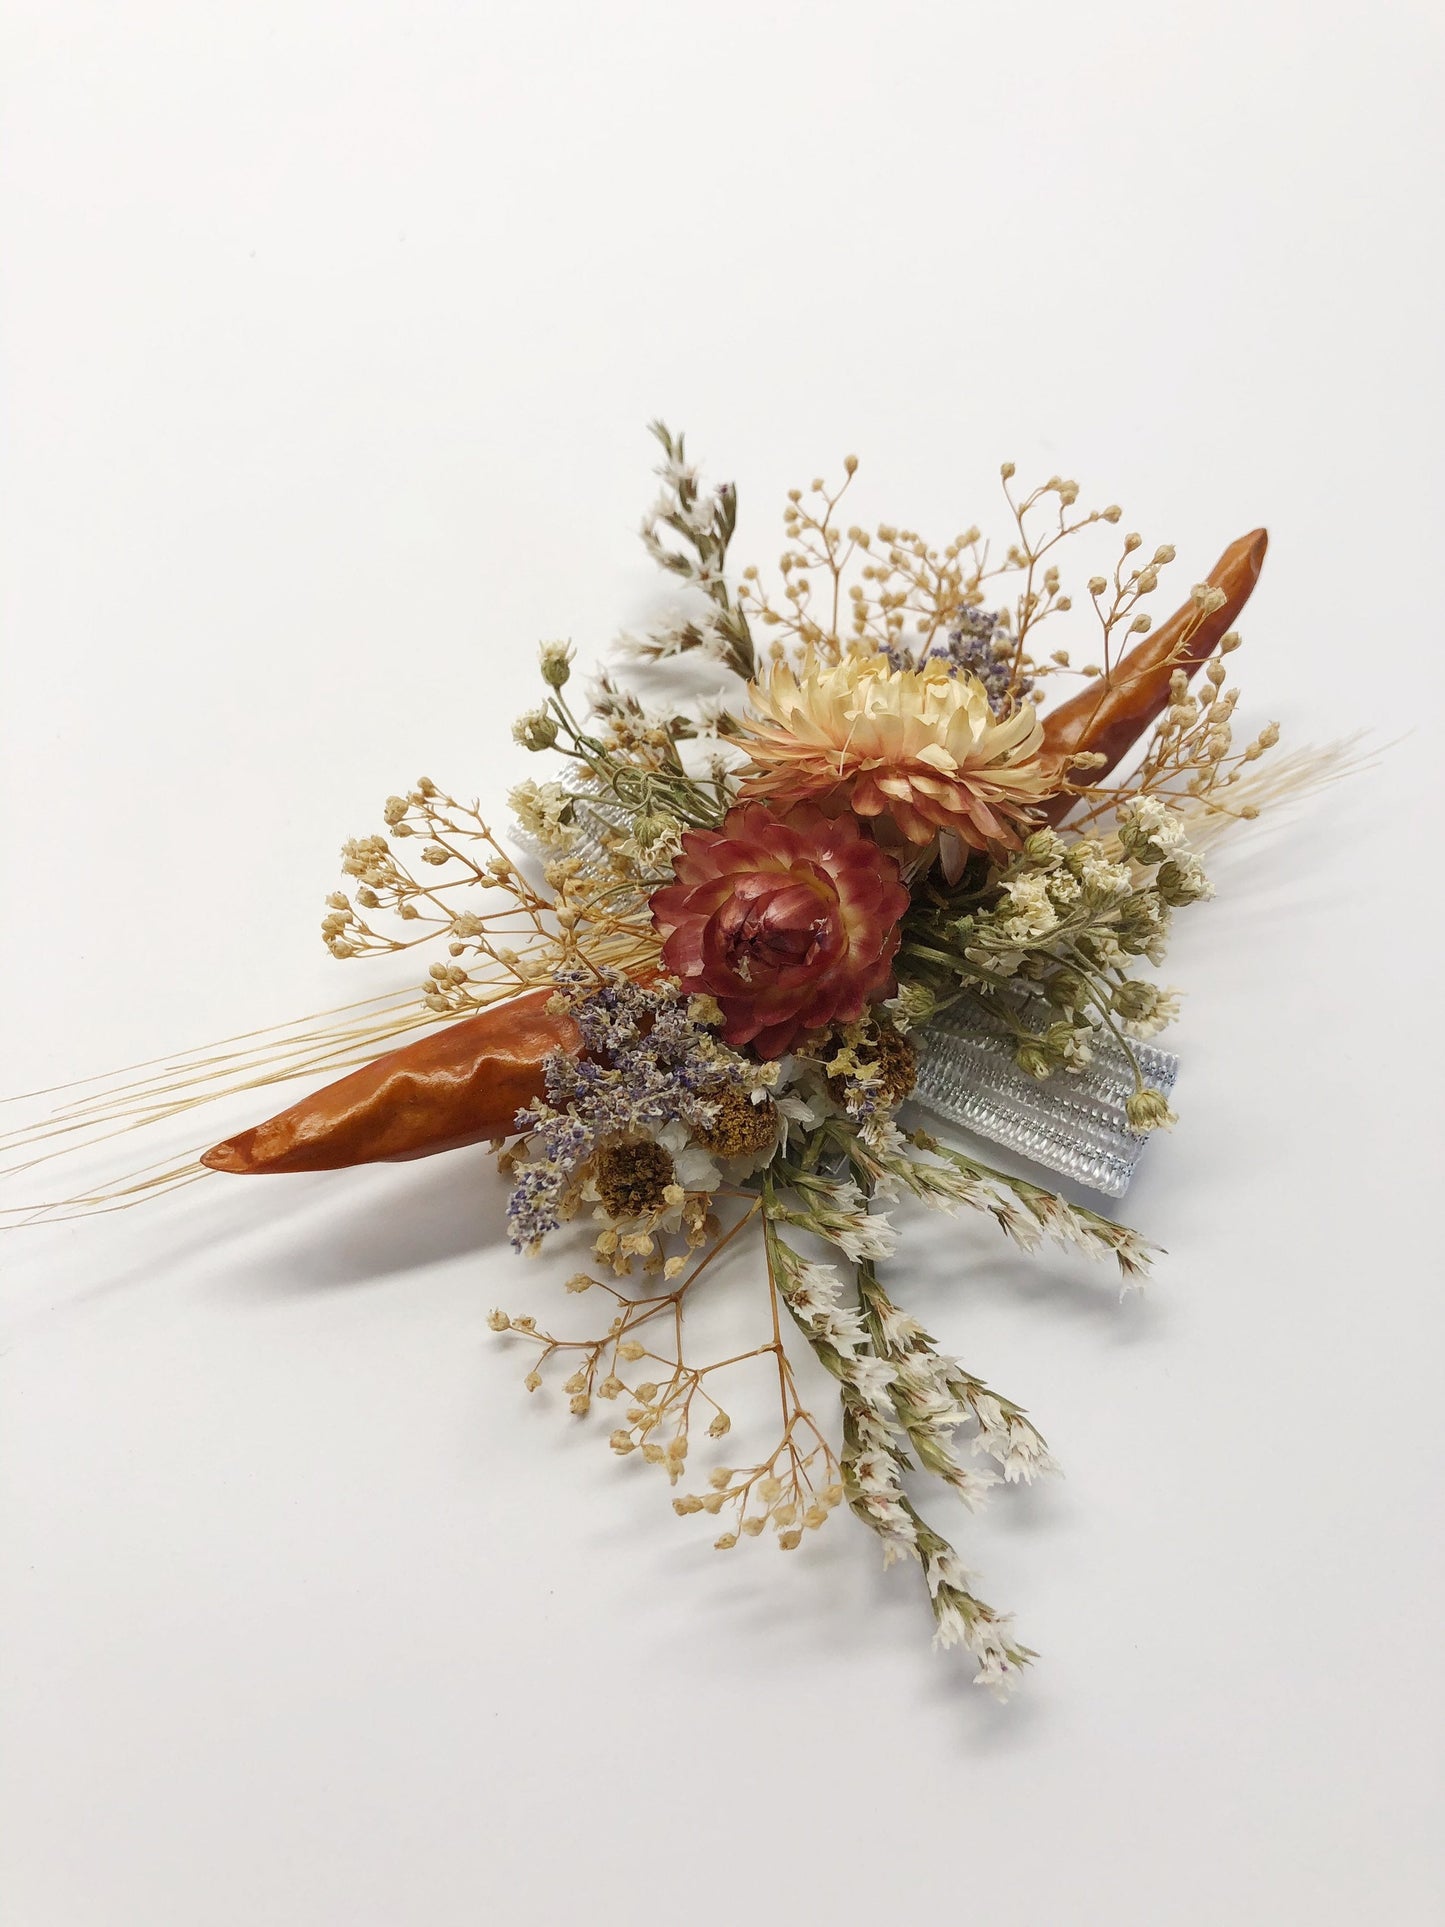 Fall Bouquet, Chili Peppers and Wheat Bouquet, Dried flowers, Black Bearded, Blonde Wheat, Chiles, Wedding, Bridal, Fall, Rustic, Country